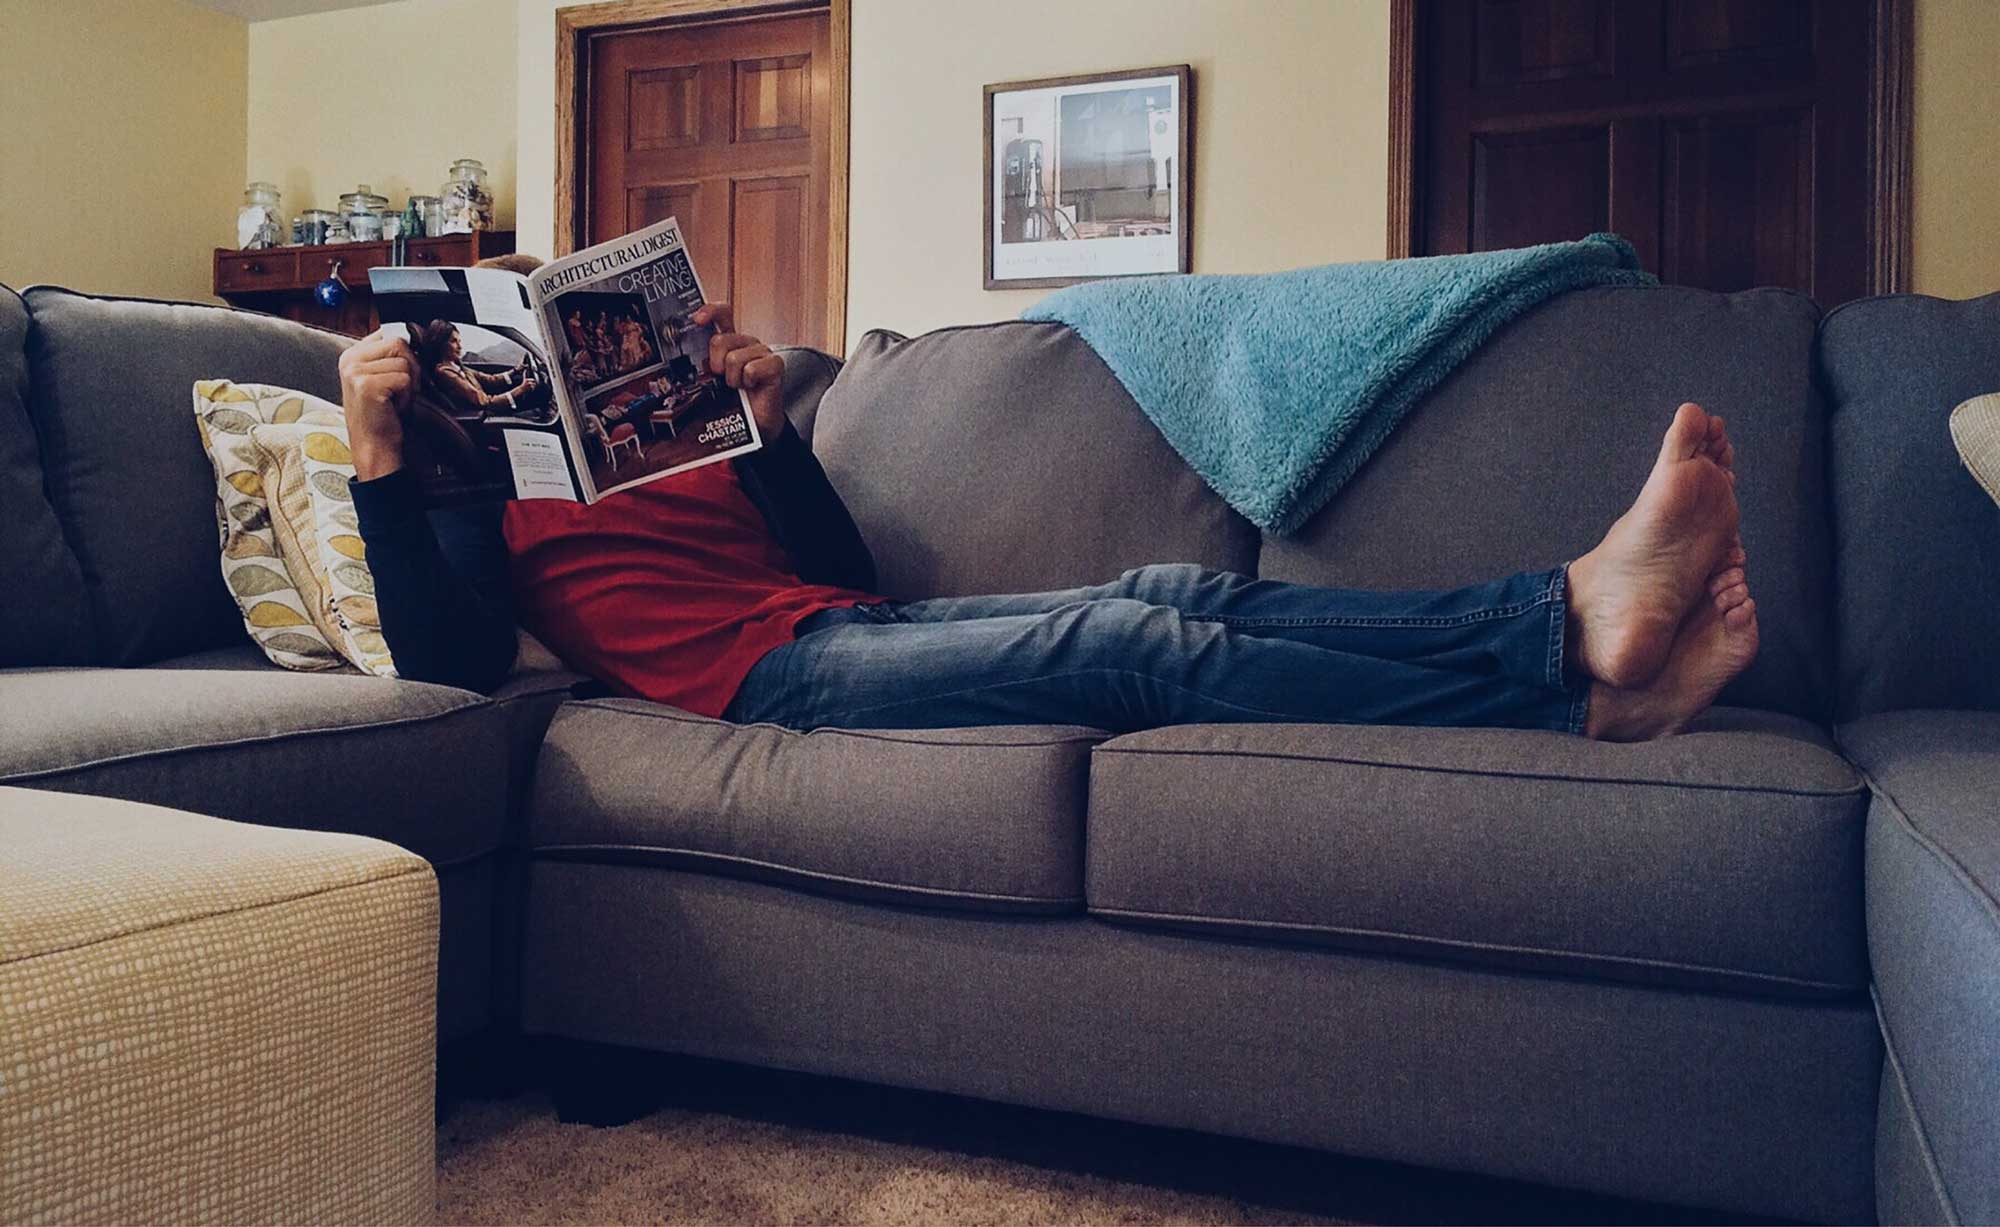 Person on couch looking at a magazine